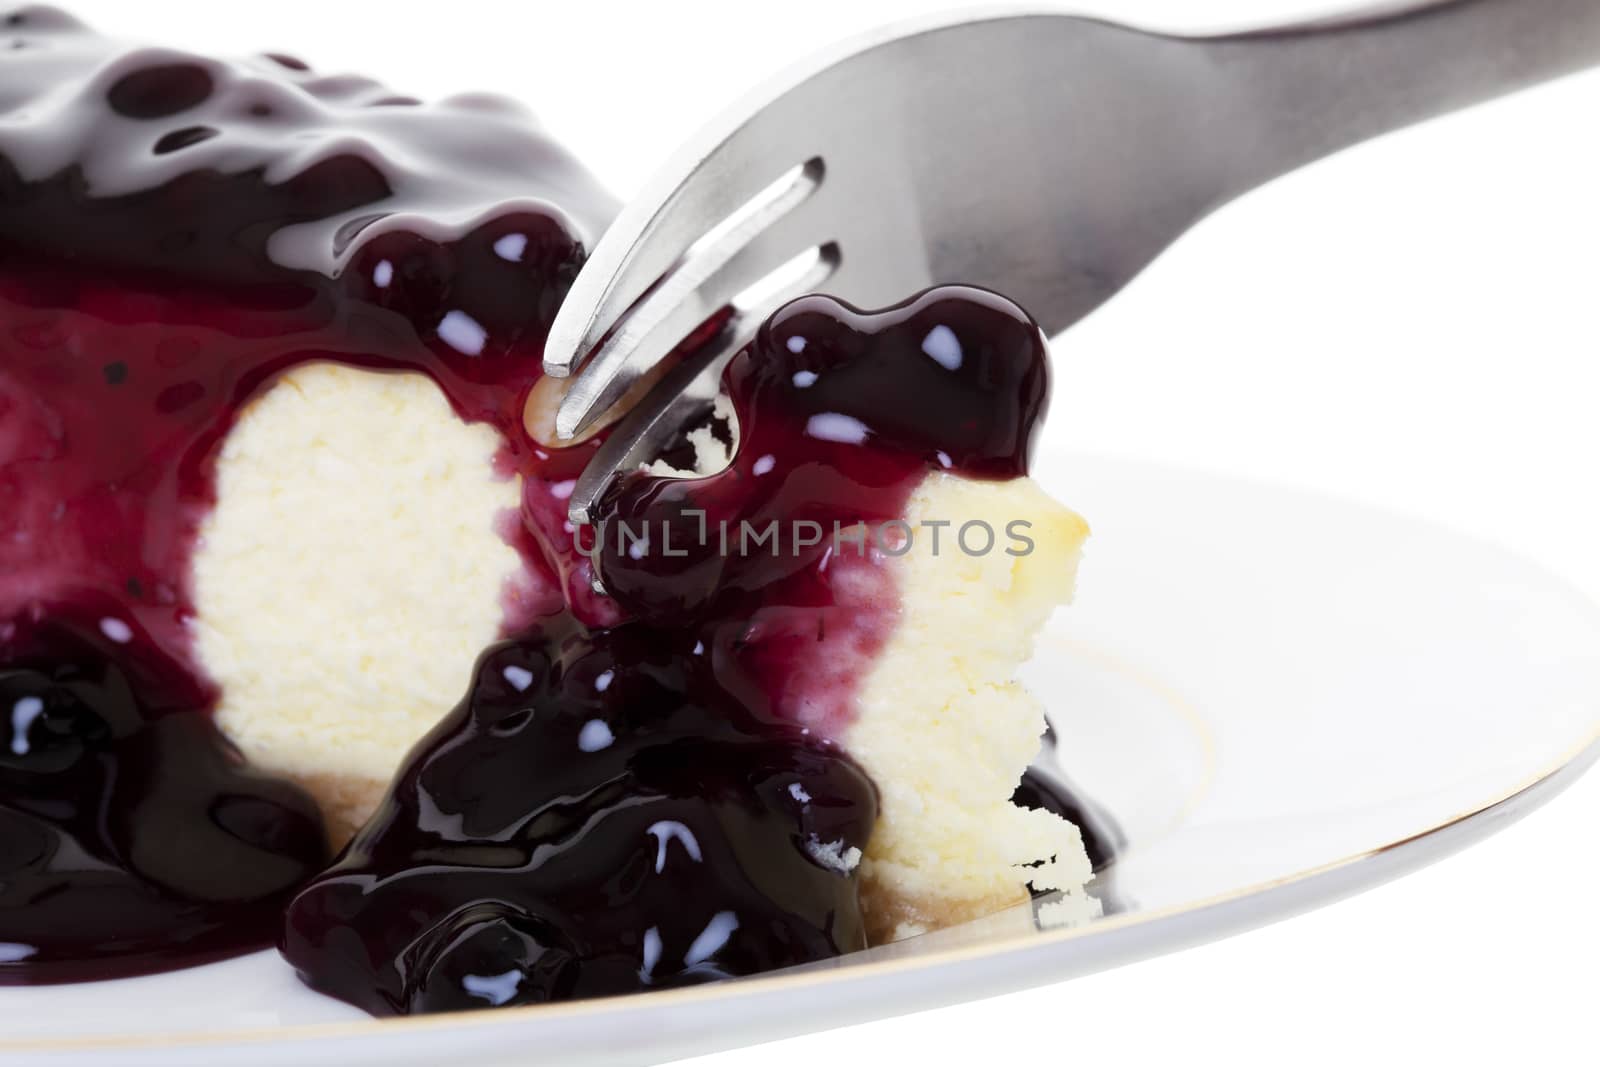 Blueberry Cheesecake With Fork by songbird839